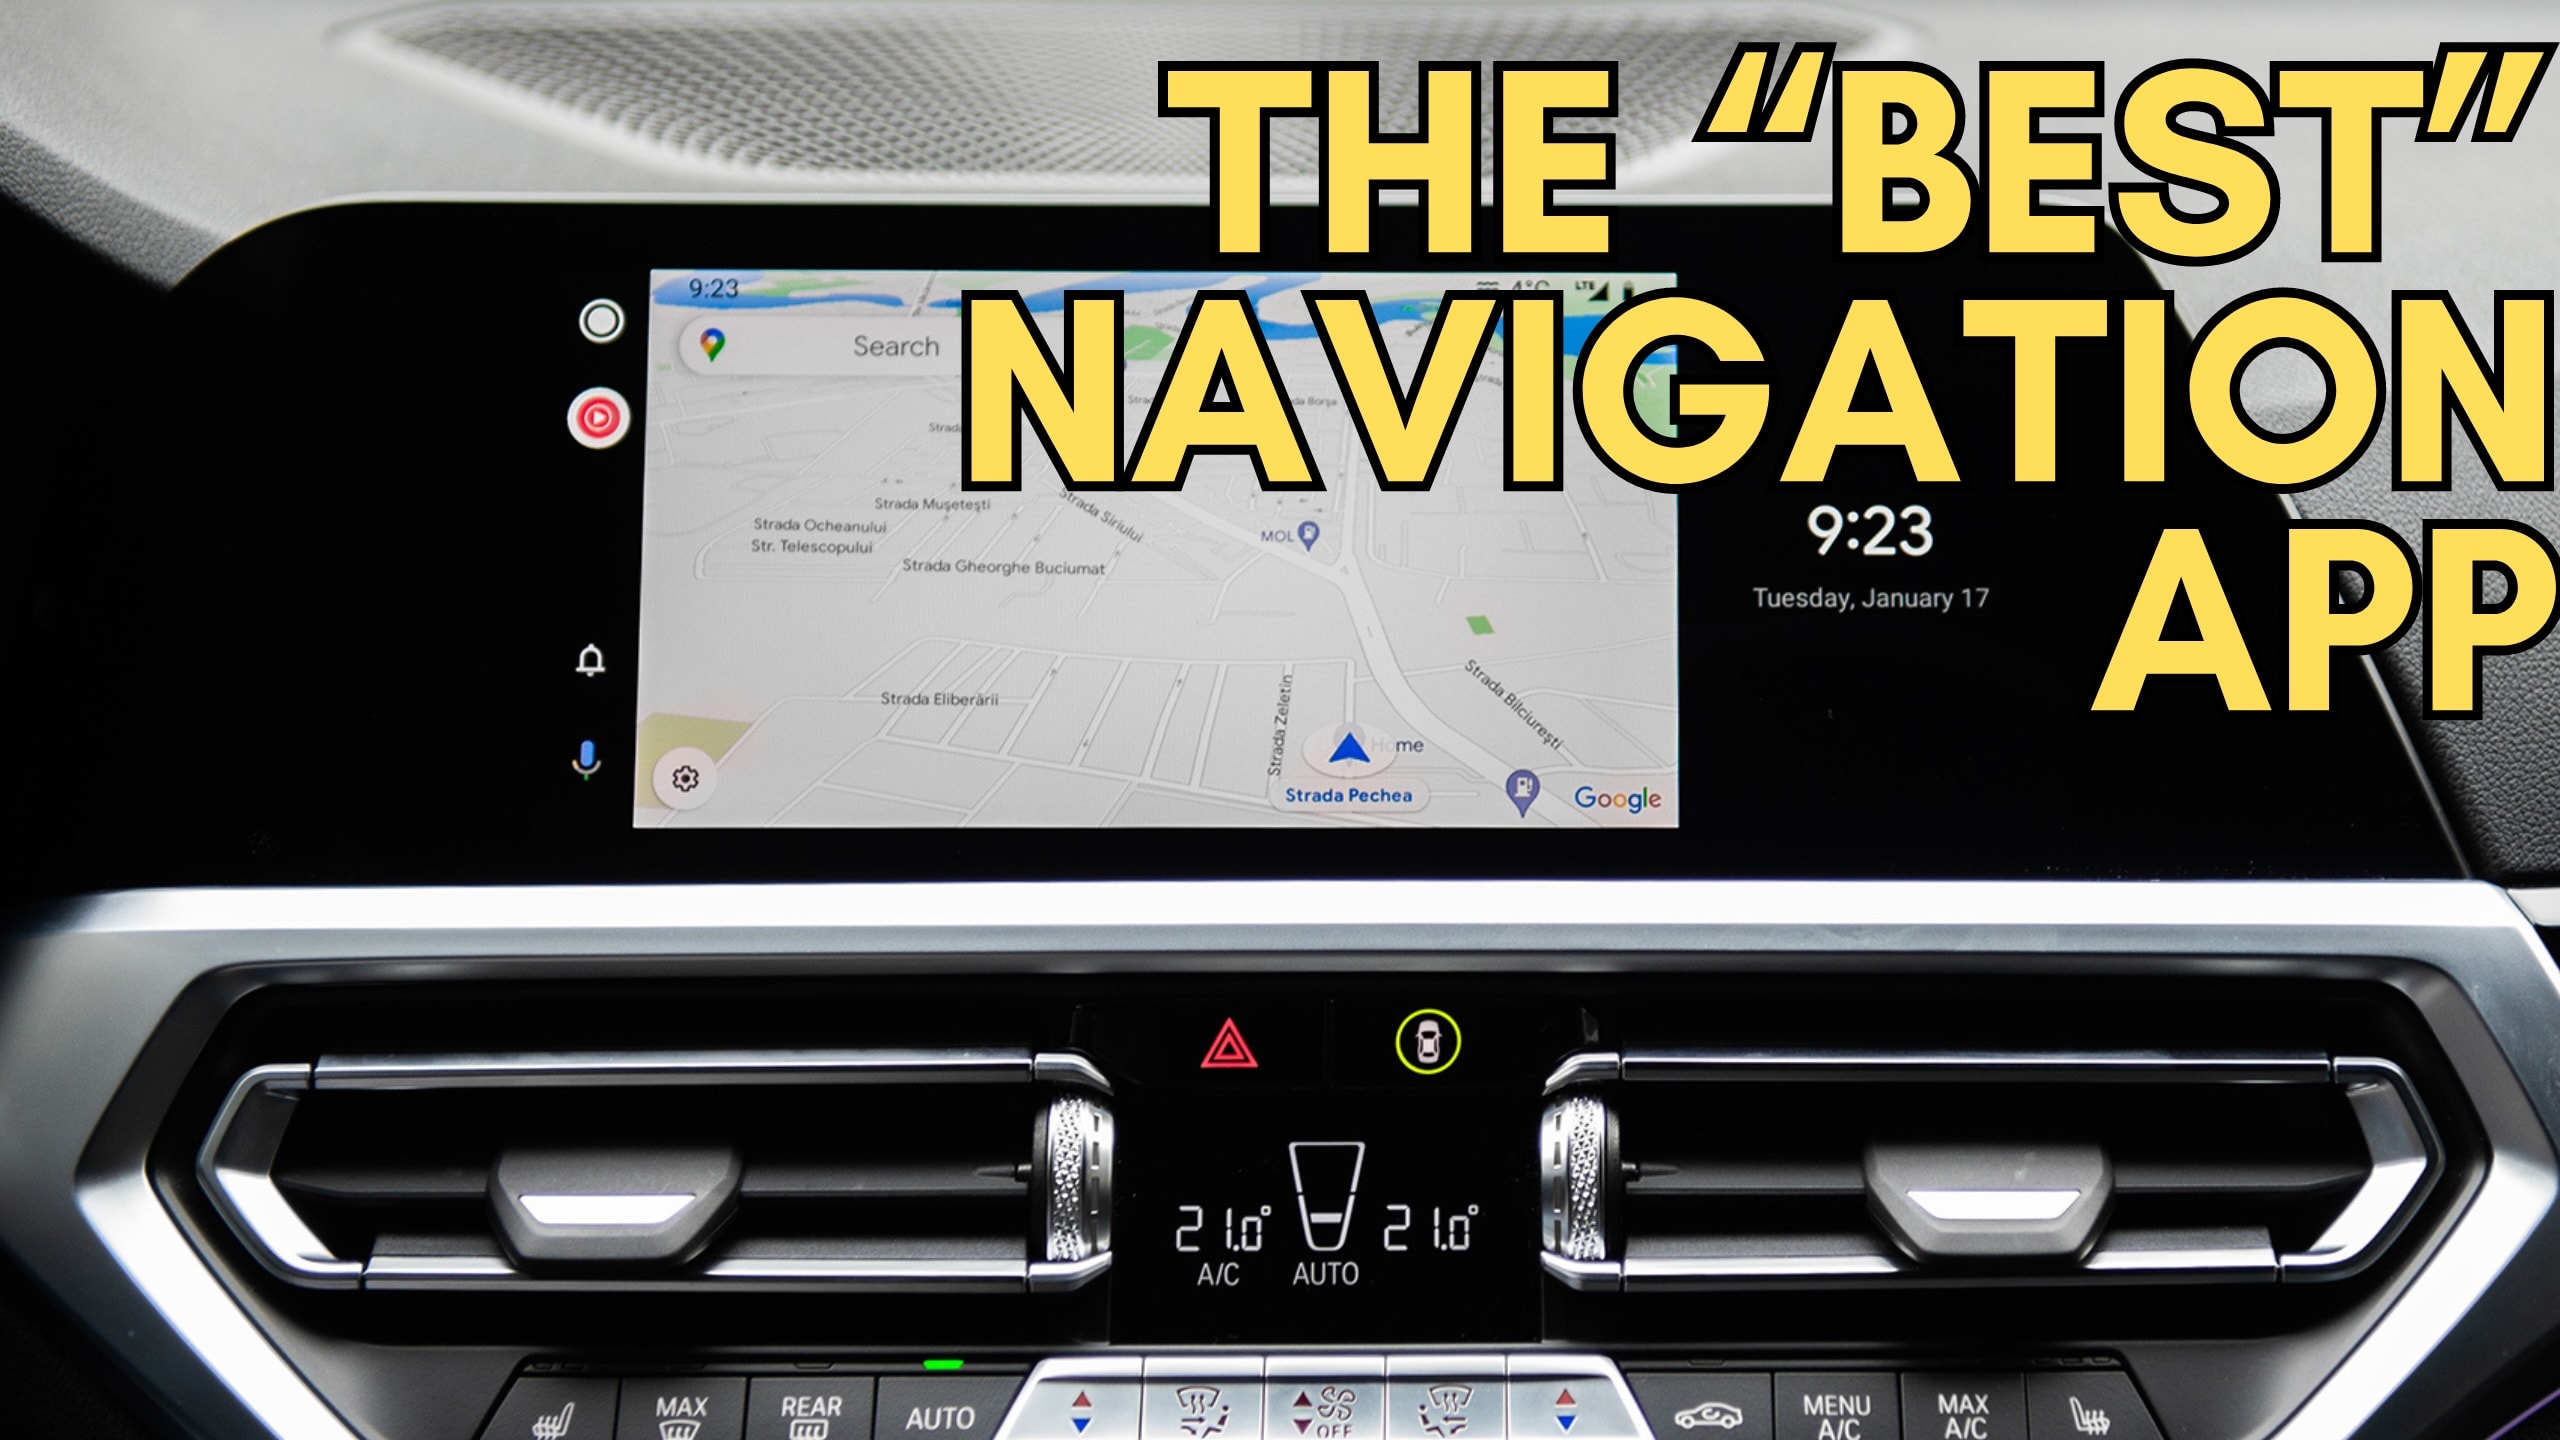 Android Auto Lets You Use Google Maps on Phone, Car Display Simultaneously  - CNET